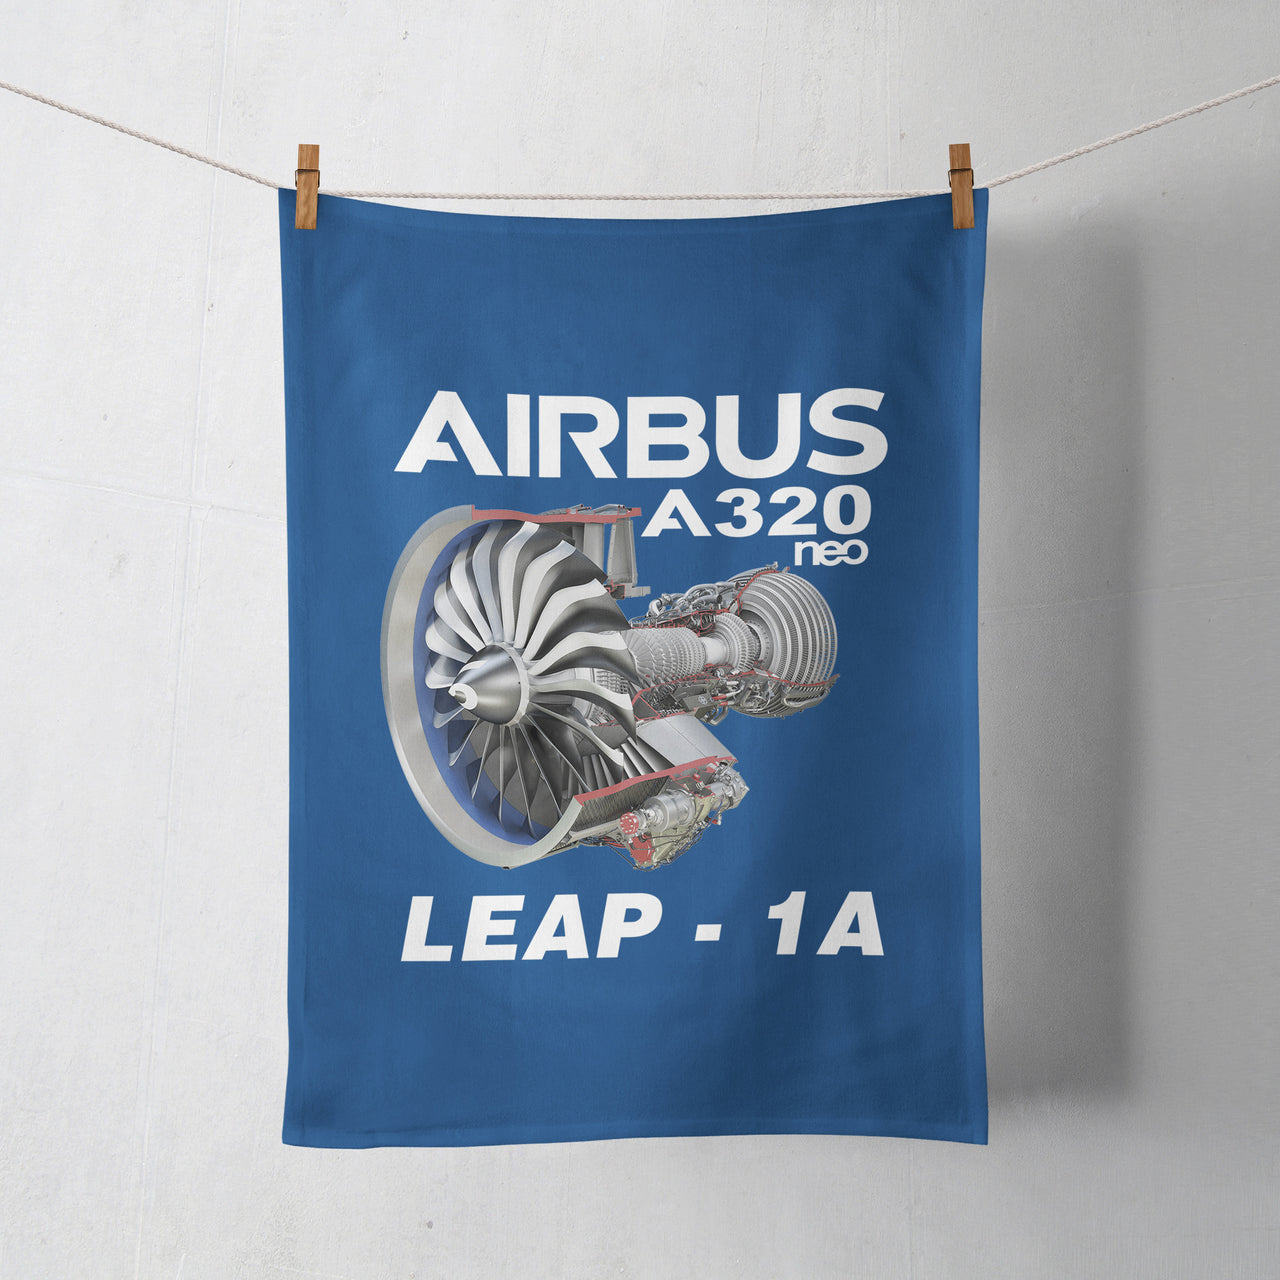 Airbus A320neo & Leap 1A Designed Towels